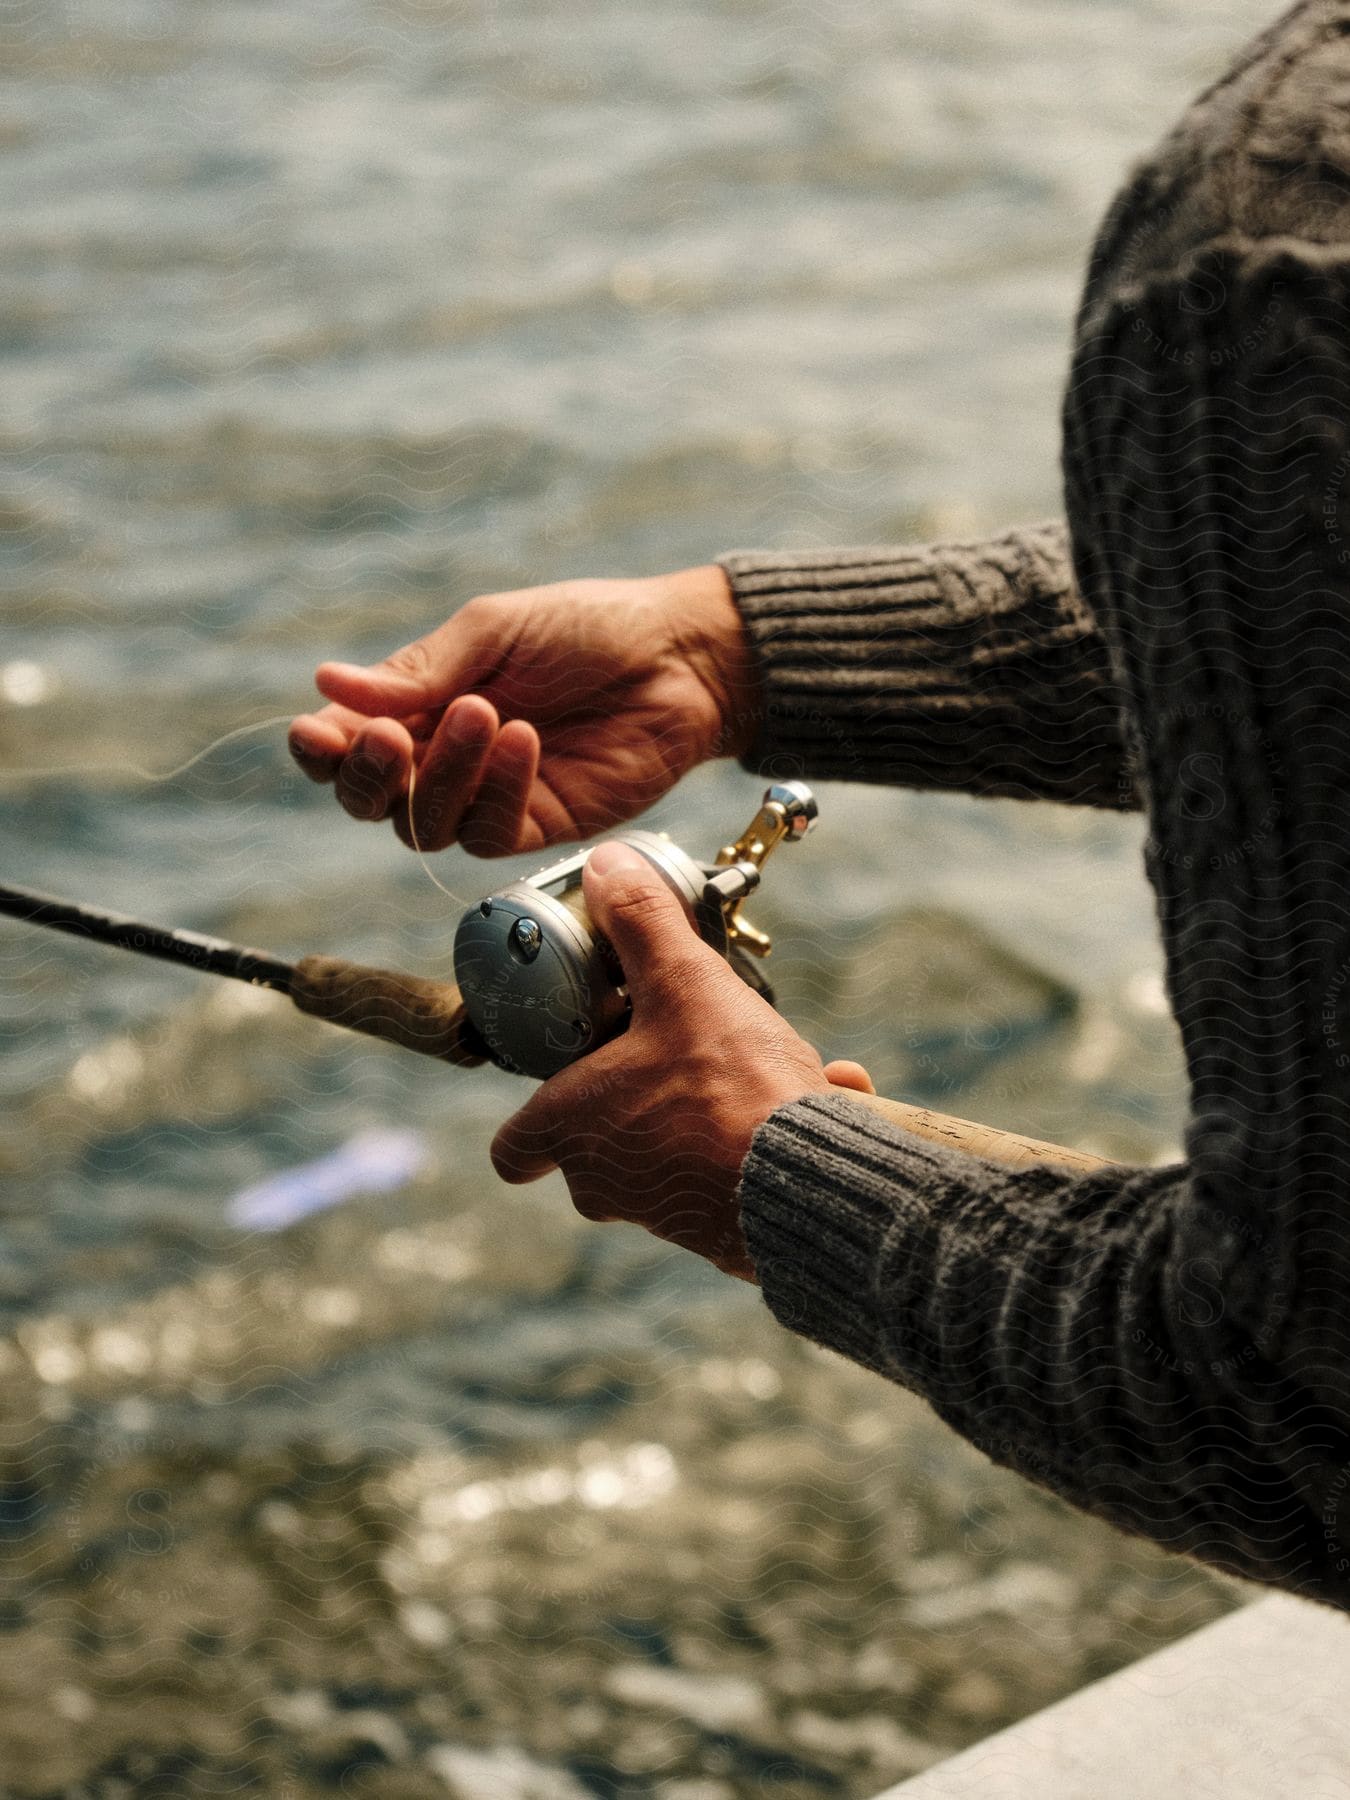 An adult is holding a fishing reel and pulling on fishing line over a body of water.